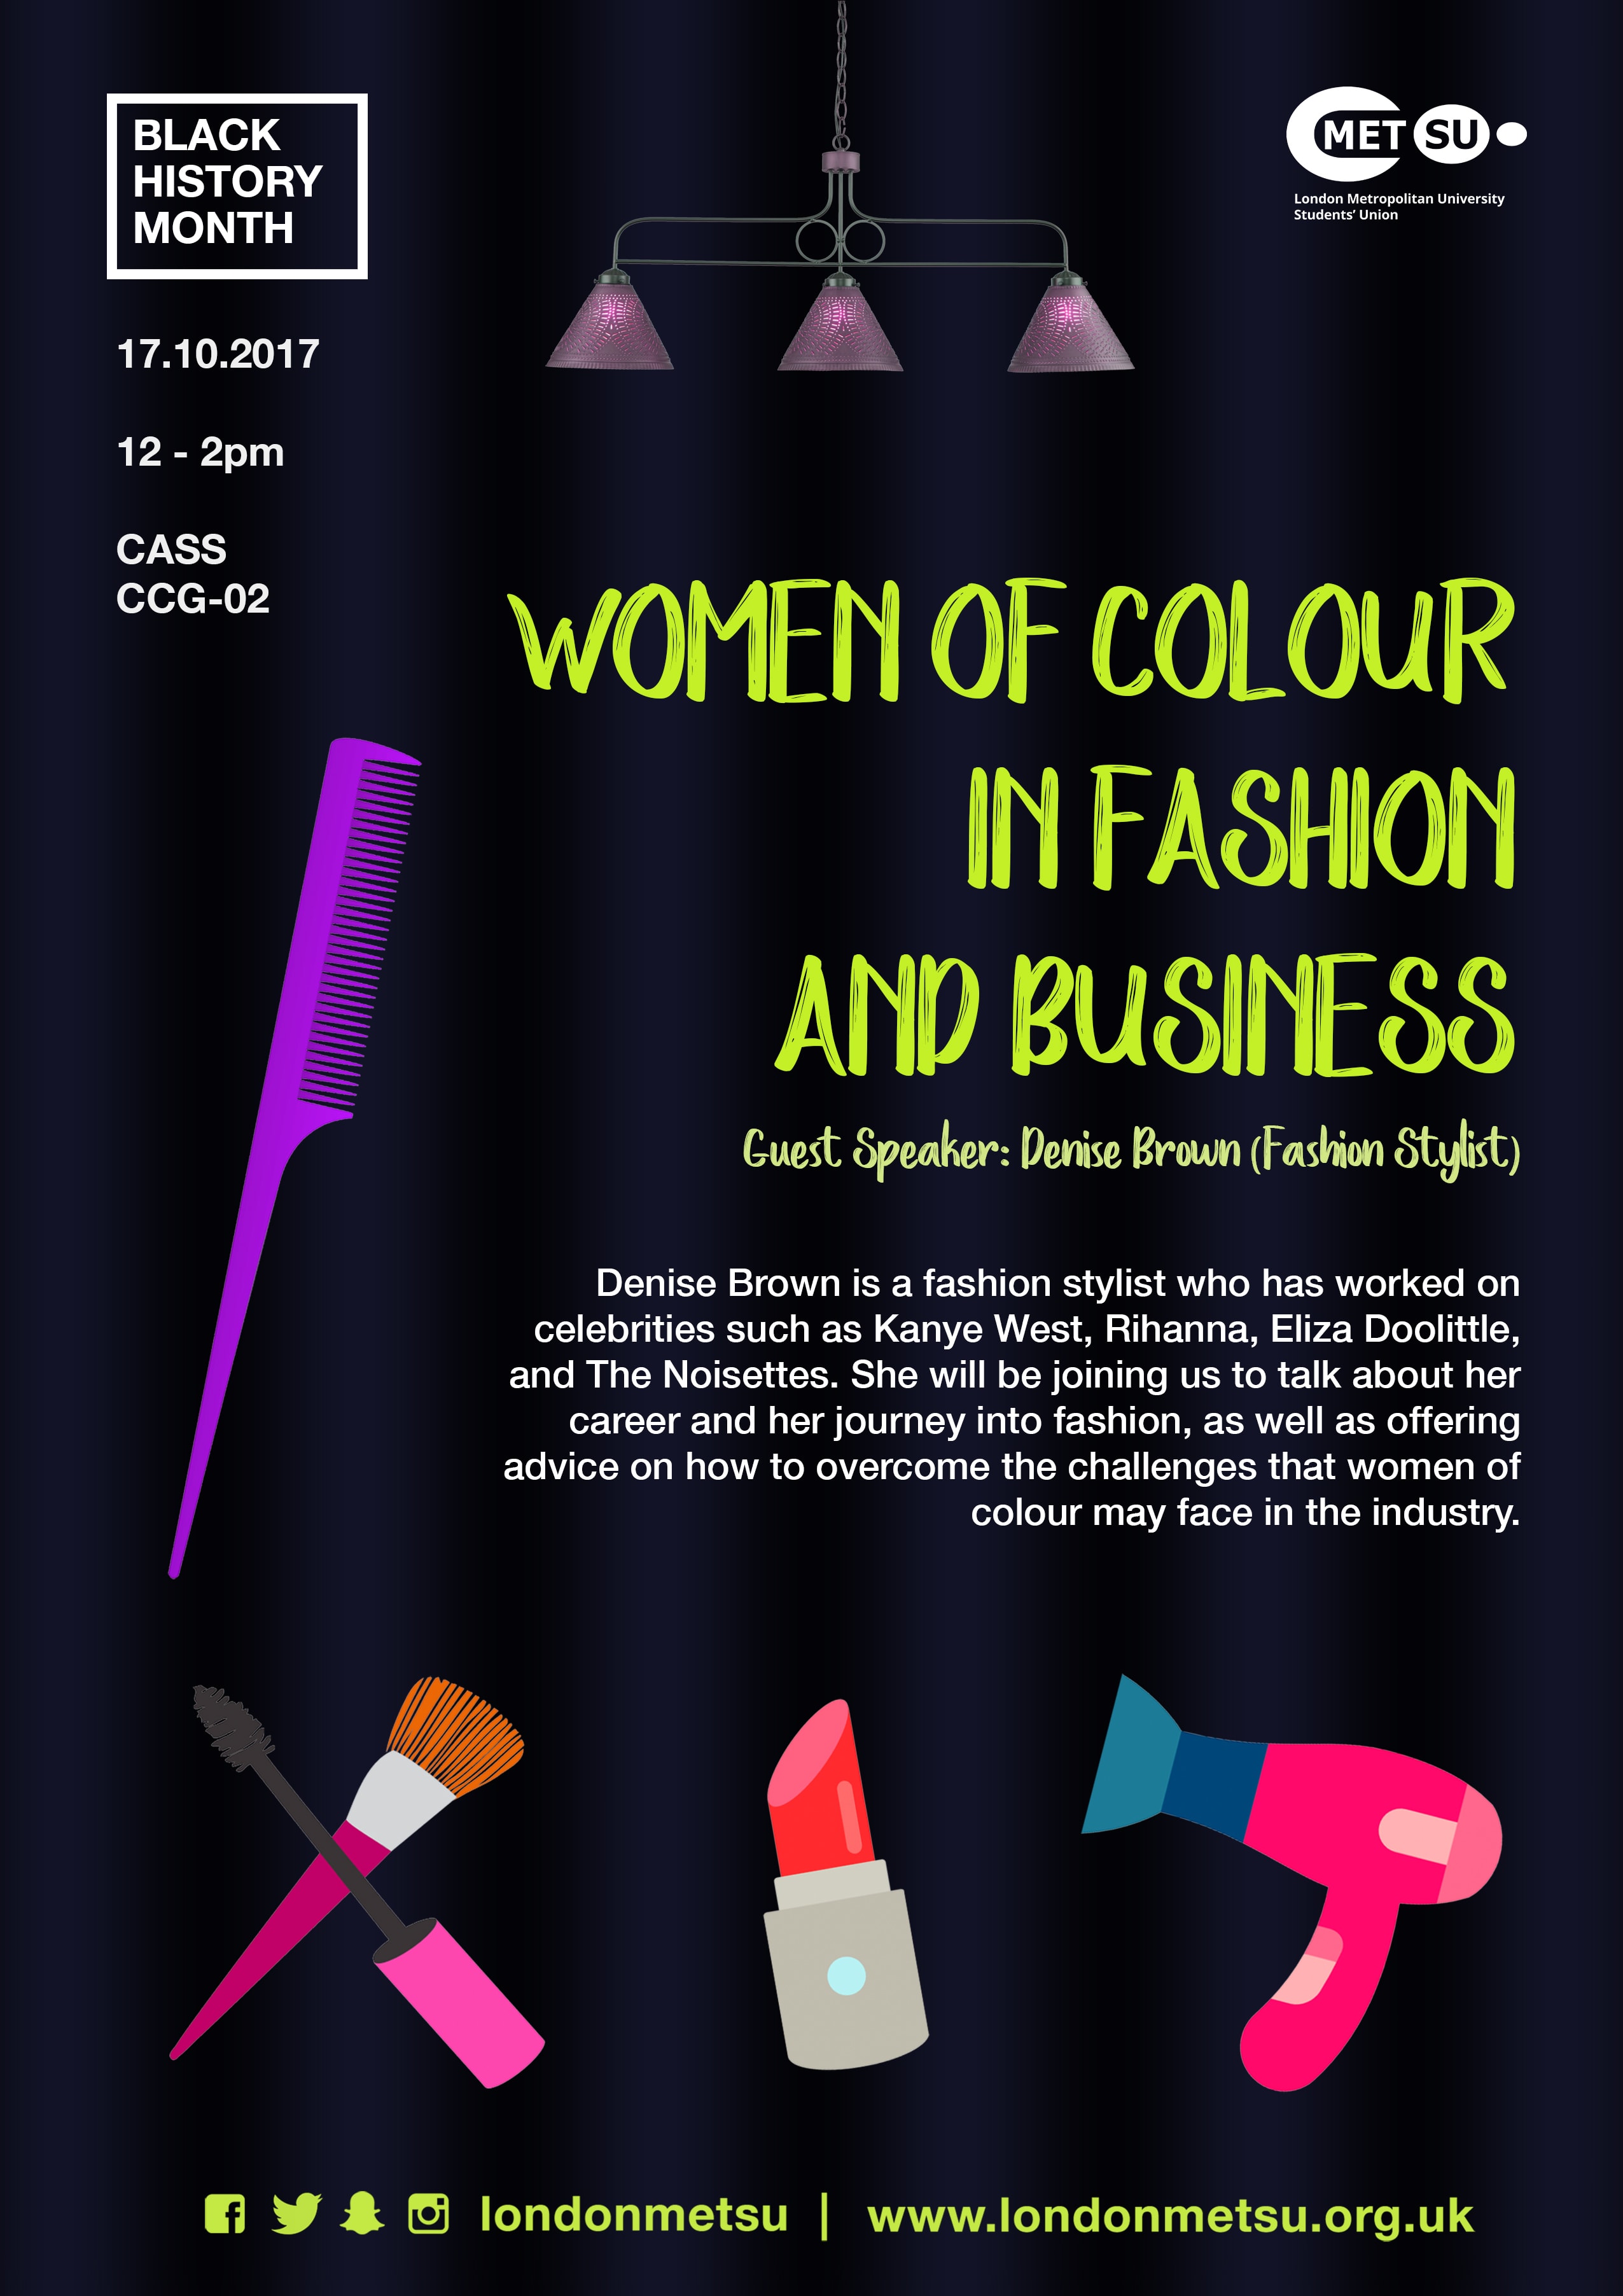 Denise Brown is a fashion stylist who has styled celebrities such as Kanye West, Rihanna, Eliza Doolittle, The Noisettes and many more. She will be talking about her career journey into fashion, offering advice on how to overcome the challenges that women of colour face in the industry.